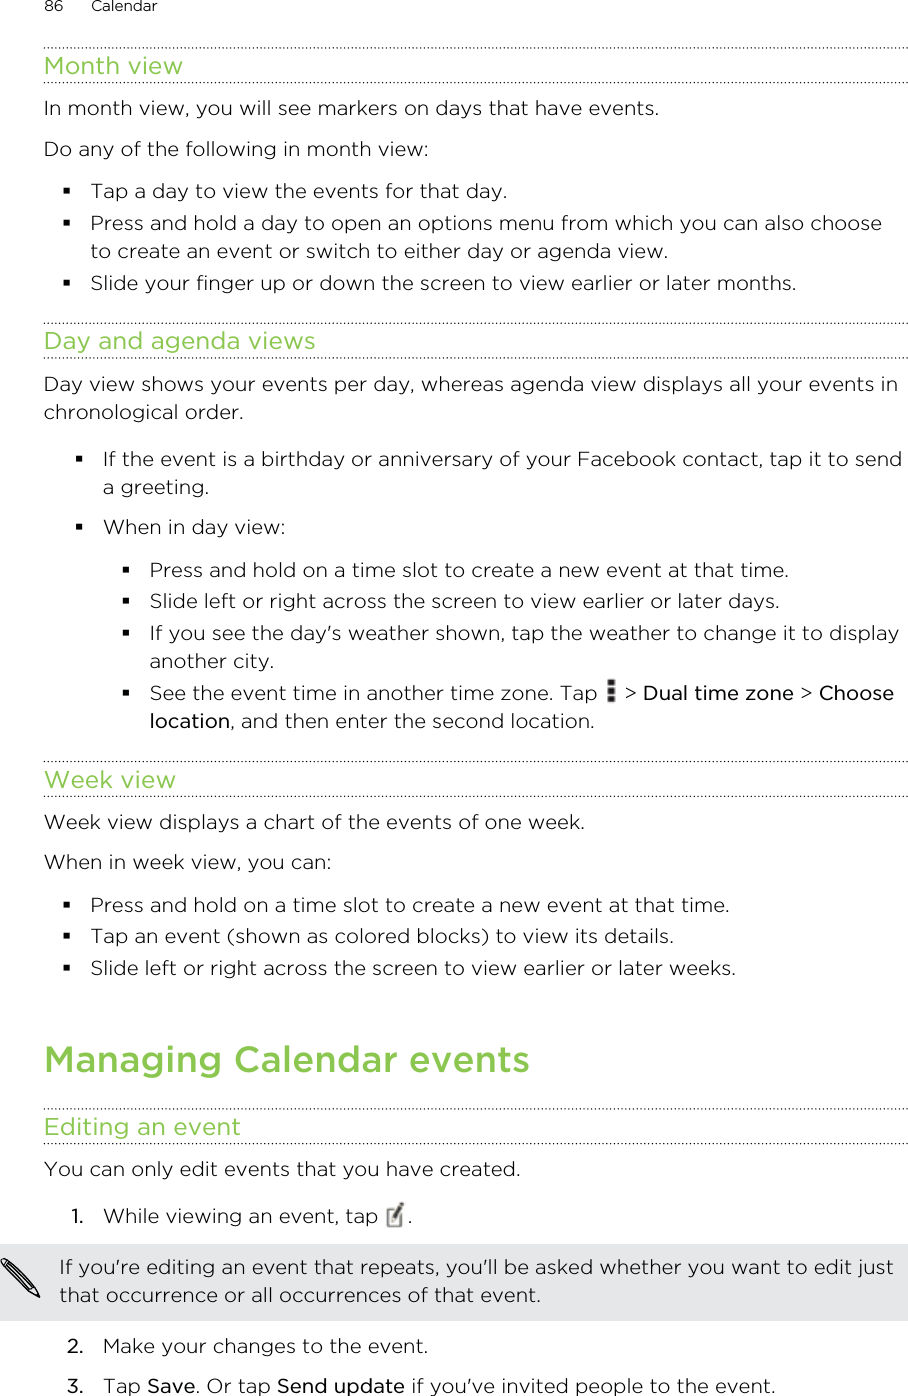 Month viewIn month view, you will see markers on days that have events.Do any of the following in month view:Tap a day to view the events for that day.Press and hold a day to open an options menu from which you can also chooseto create an event or switch to either day or agenda view.Slide your finger up or down the screen to view earlier or later months.Day and agenda viewsDay view shows your events per day, whereas agenda view displays all your events inchronological order.If the event is a birthday or anniversary of your Facebook contact, tap it to senda greeting.When in day view:Press and hold on a time slot to create a new event at that time.Slide left or right across the screen to view earlier or later days.If you see the day&apos;s weather shown, tap the weather to change it to displayanother city.See the event time in another time zone. Tap   &gt; Dual time zone &gt; Chooselocation, and then enter the second location.Week viewWeek view displays a chart of the events of one week.When in week view, you can:Press and hold on a time slot to create a new event at that time.Tap an event (shown as colored blocks) to view its details.Slide left or right across the screen to view earlier or later weeks.Managing Calendar eventsEditing an eventYou can only edit events that you have created.1. While viewing an event, tap  . If you&apos;re editing an event that repeats, you&apos;ll be asked whether you want to edit justthat occurrence or all occurrences of that event.2. Make your changes to the event.3. Tap Save. Or tap Send update if you&apos;ve invited people to the event.86 Calendar